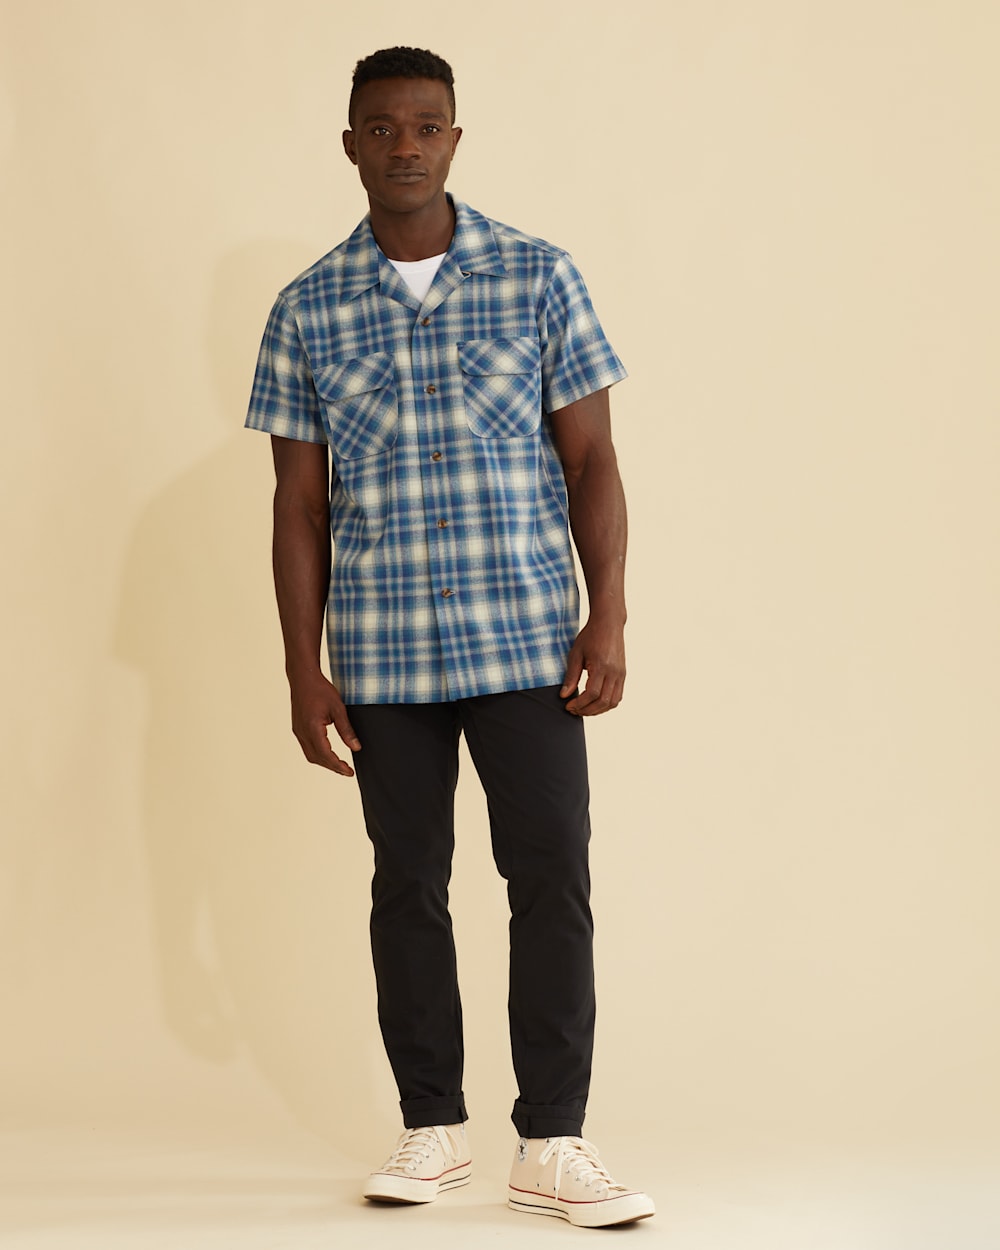 ALTERNATE VIEW OF MEN'S PLAID SHORT-SLEEVE BOARD SHIRT IN BLUE/WHITE PLAID image number 5